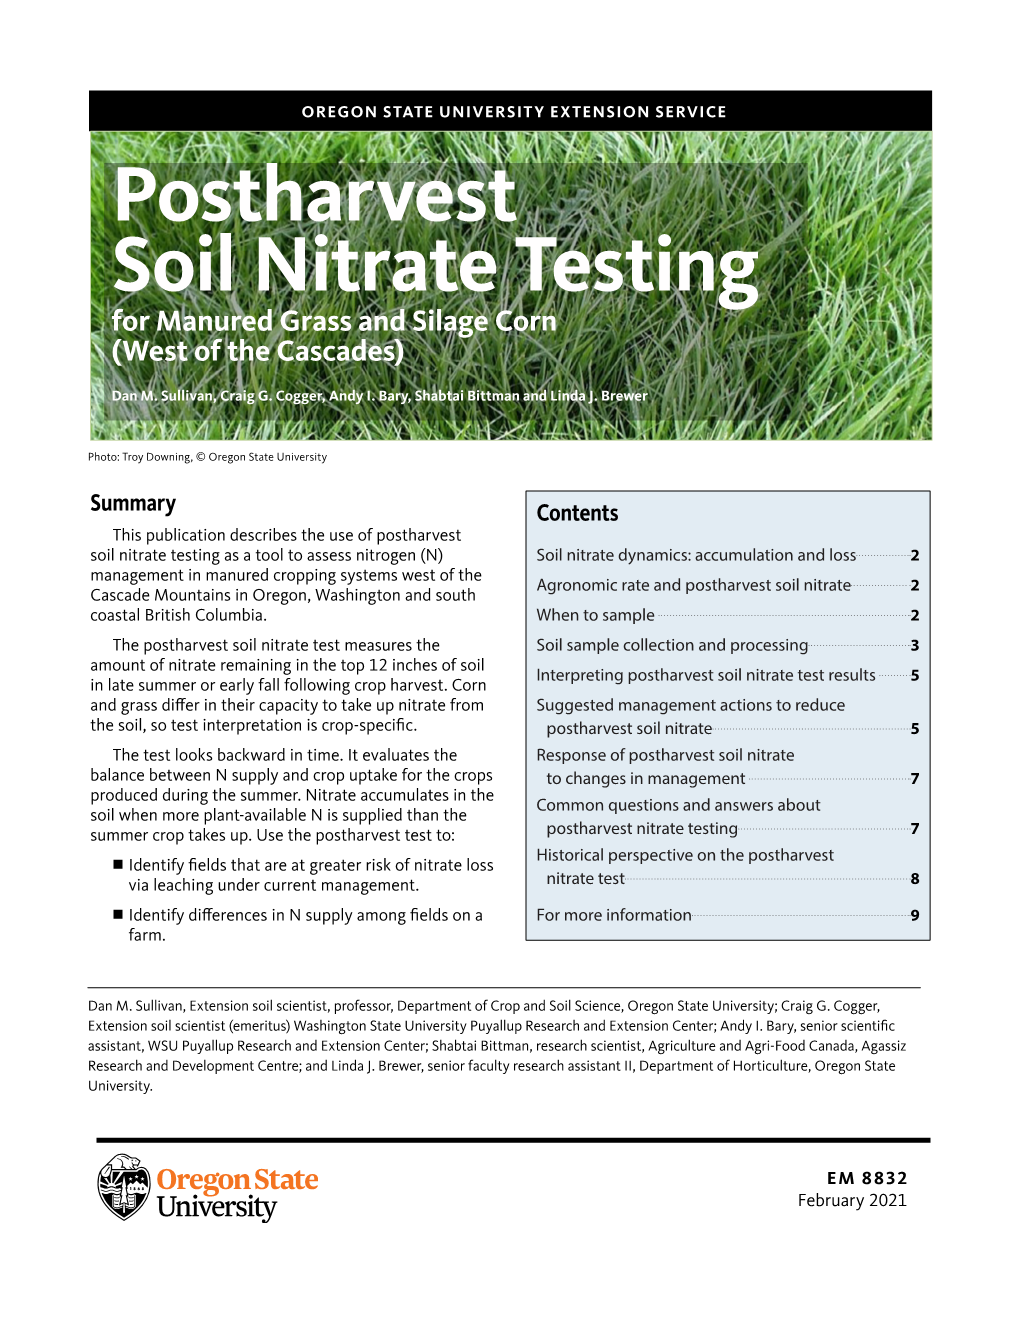 Postharvest Soil Nitrate Testing for Manured Grass and Silage Corn (West of the Cascades)